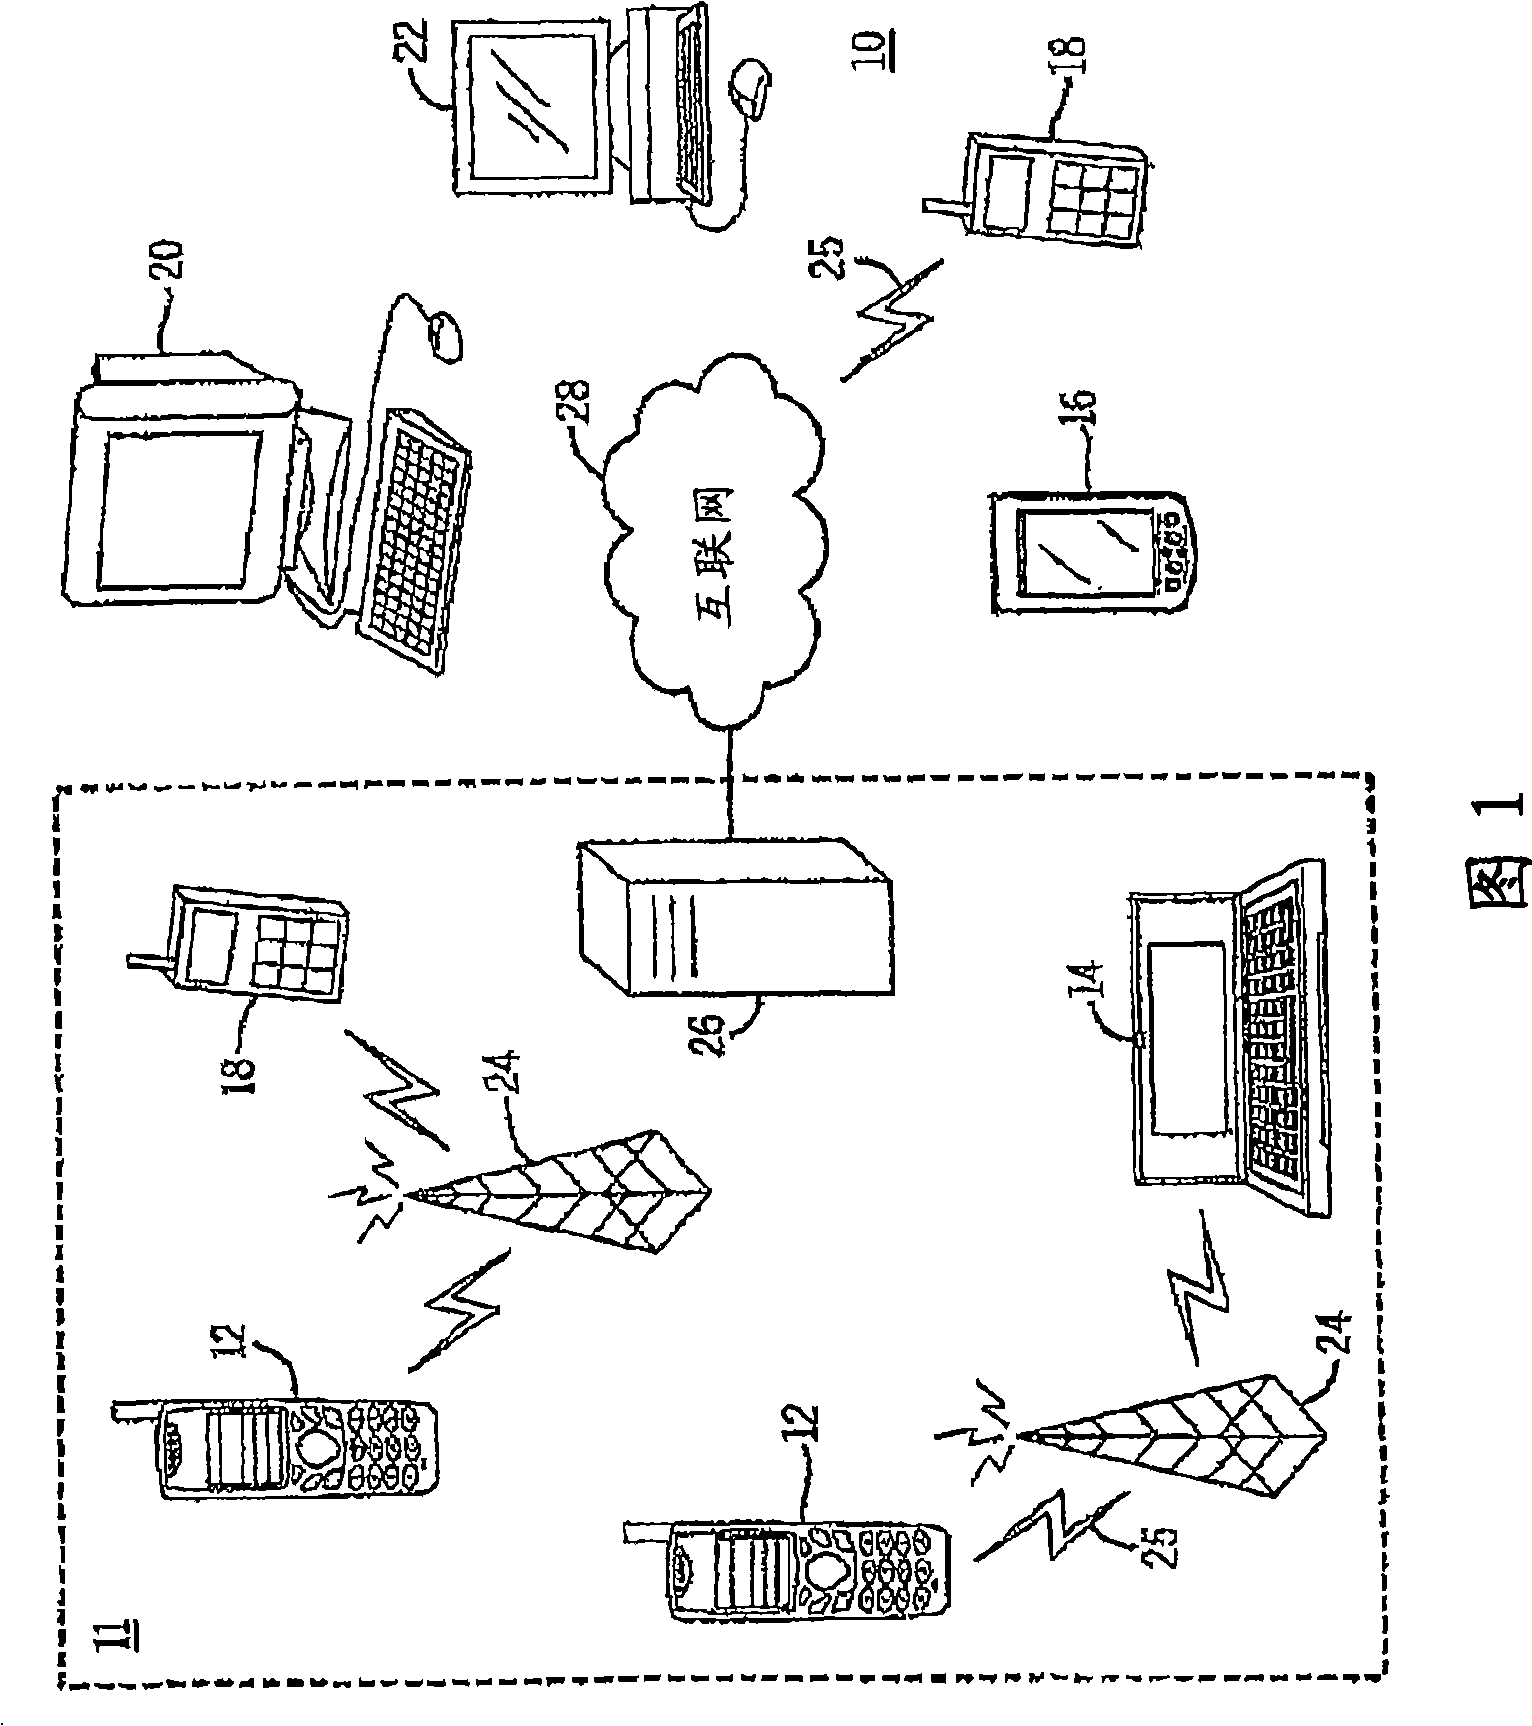 Method for embedding SVG content into an ISO base media file format for progressive downloading and streaming of rich media content